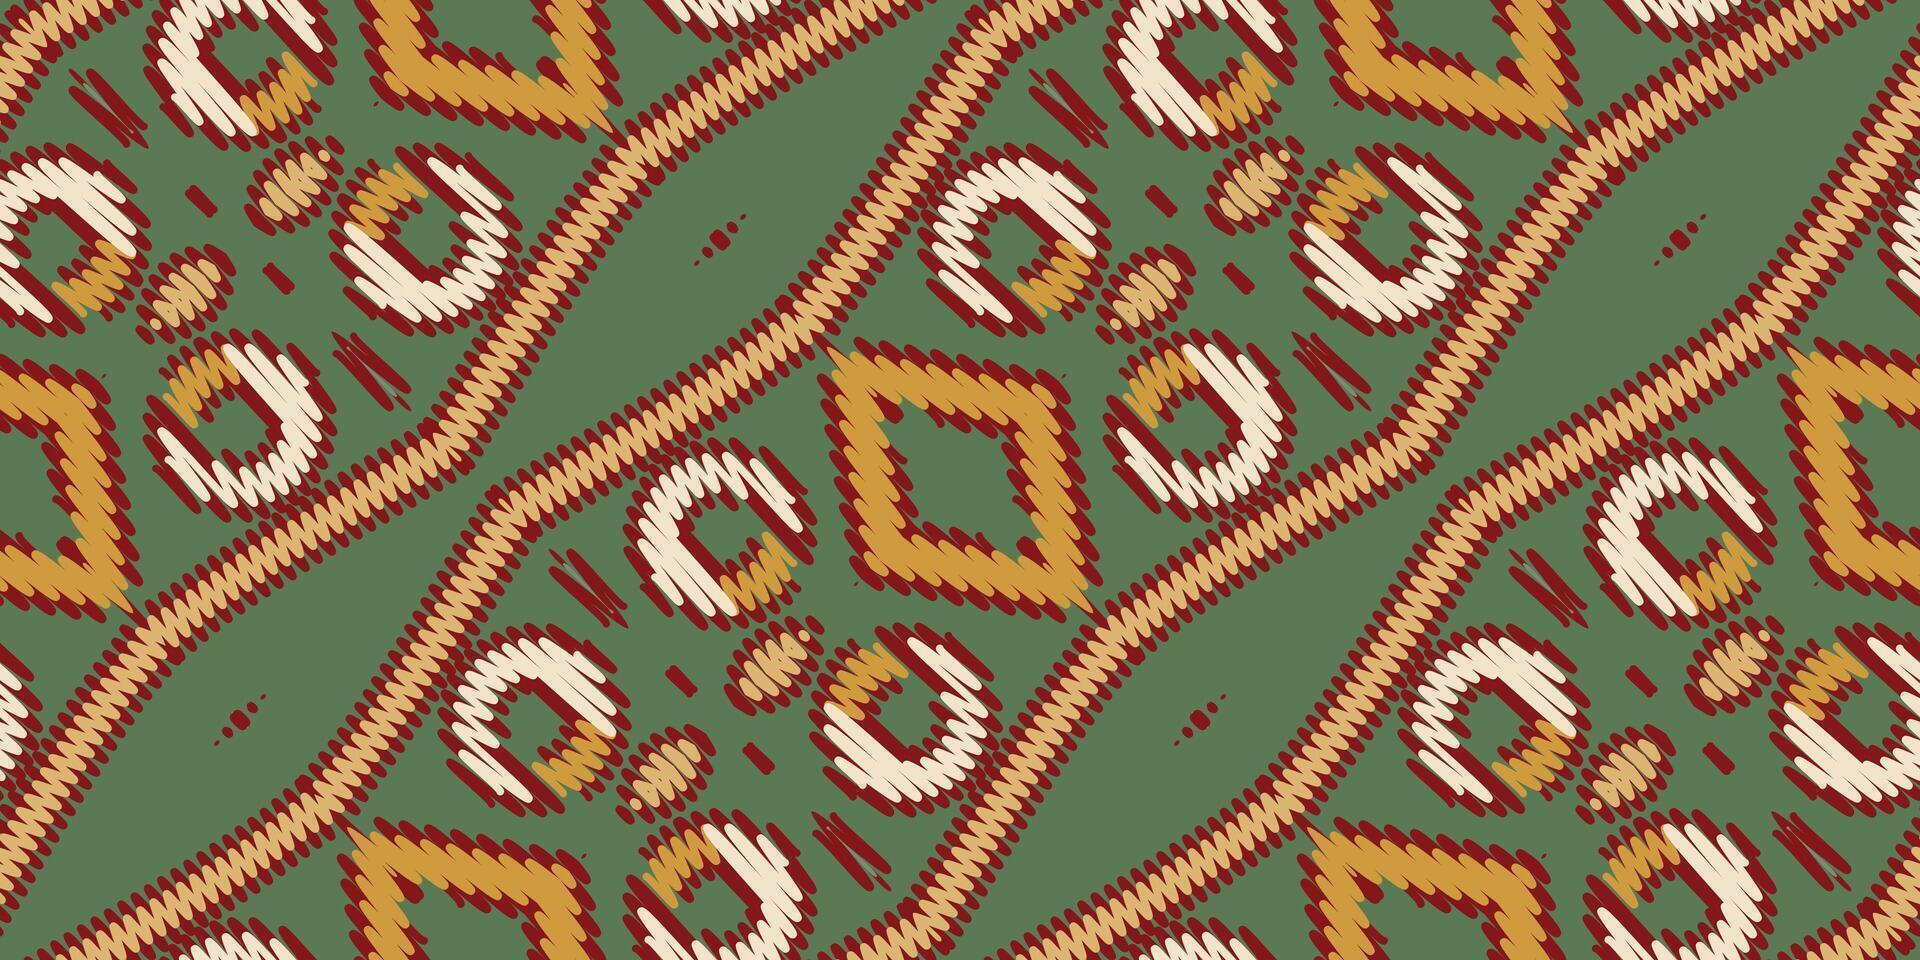 African Ikat Paisley Embroidery. Geometric Ethnic Oriental Seamless Pattern Traditional Background. Aztec Style Abstract Vector Illustration. Design for Texture, Fabric, Clothing, Wrapping, Carpet.